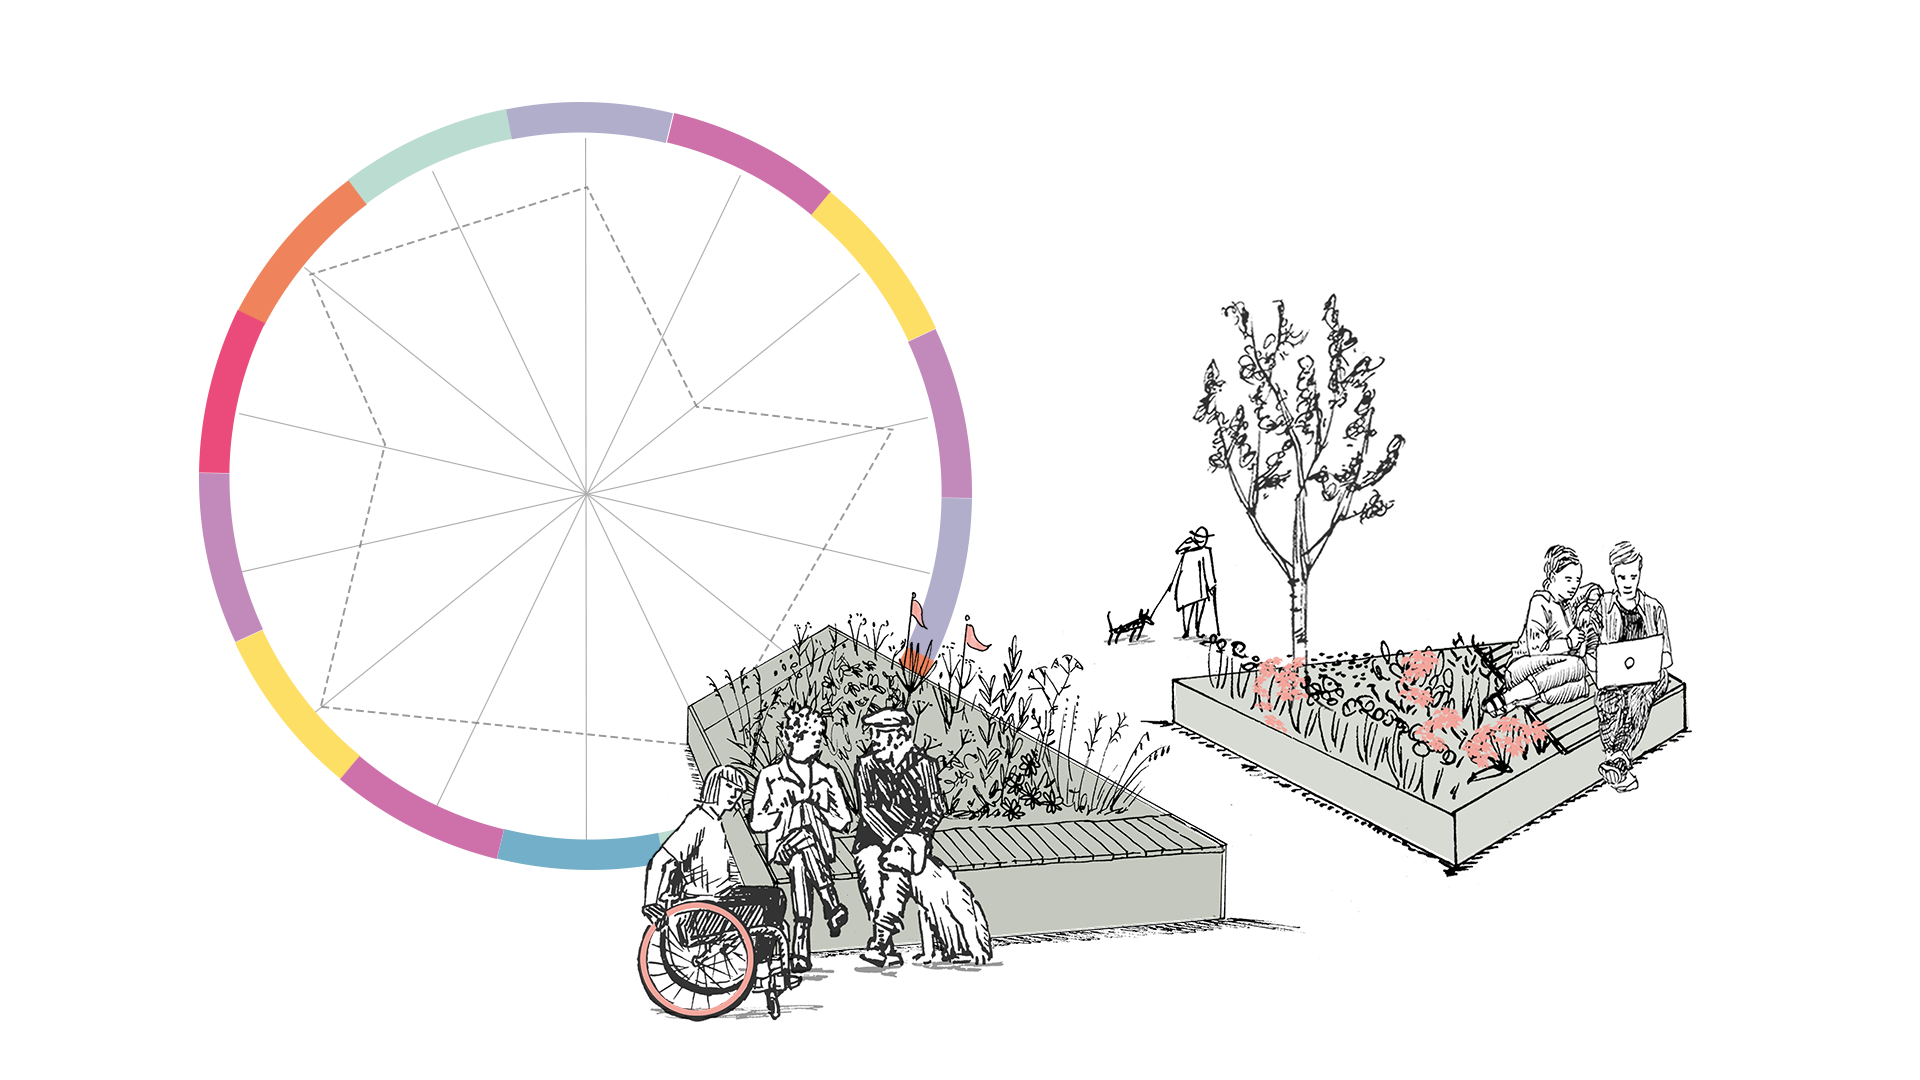 An illustration of the Place Standard wheel in the background. People enjoying a green open space in the foreground.